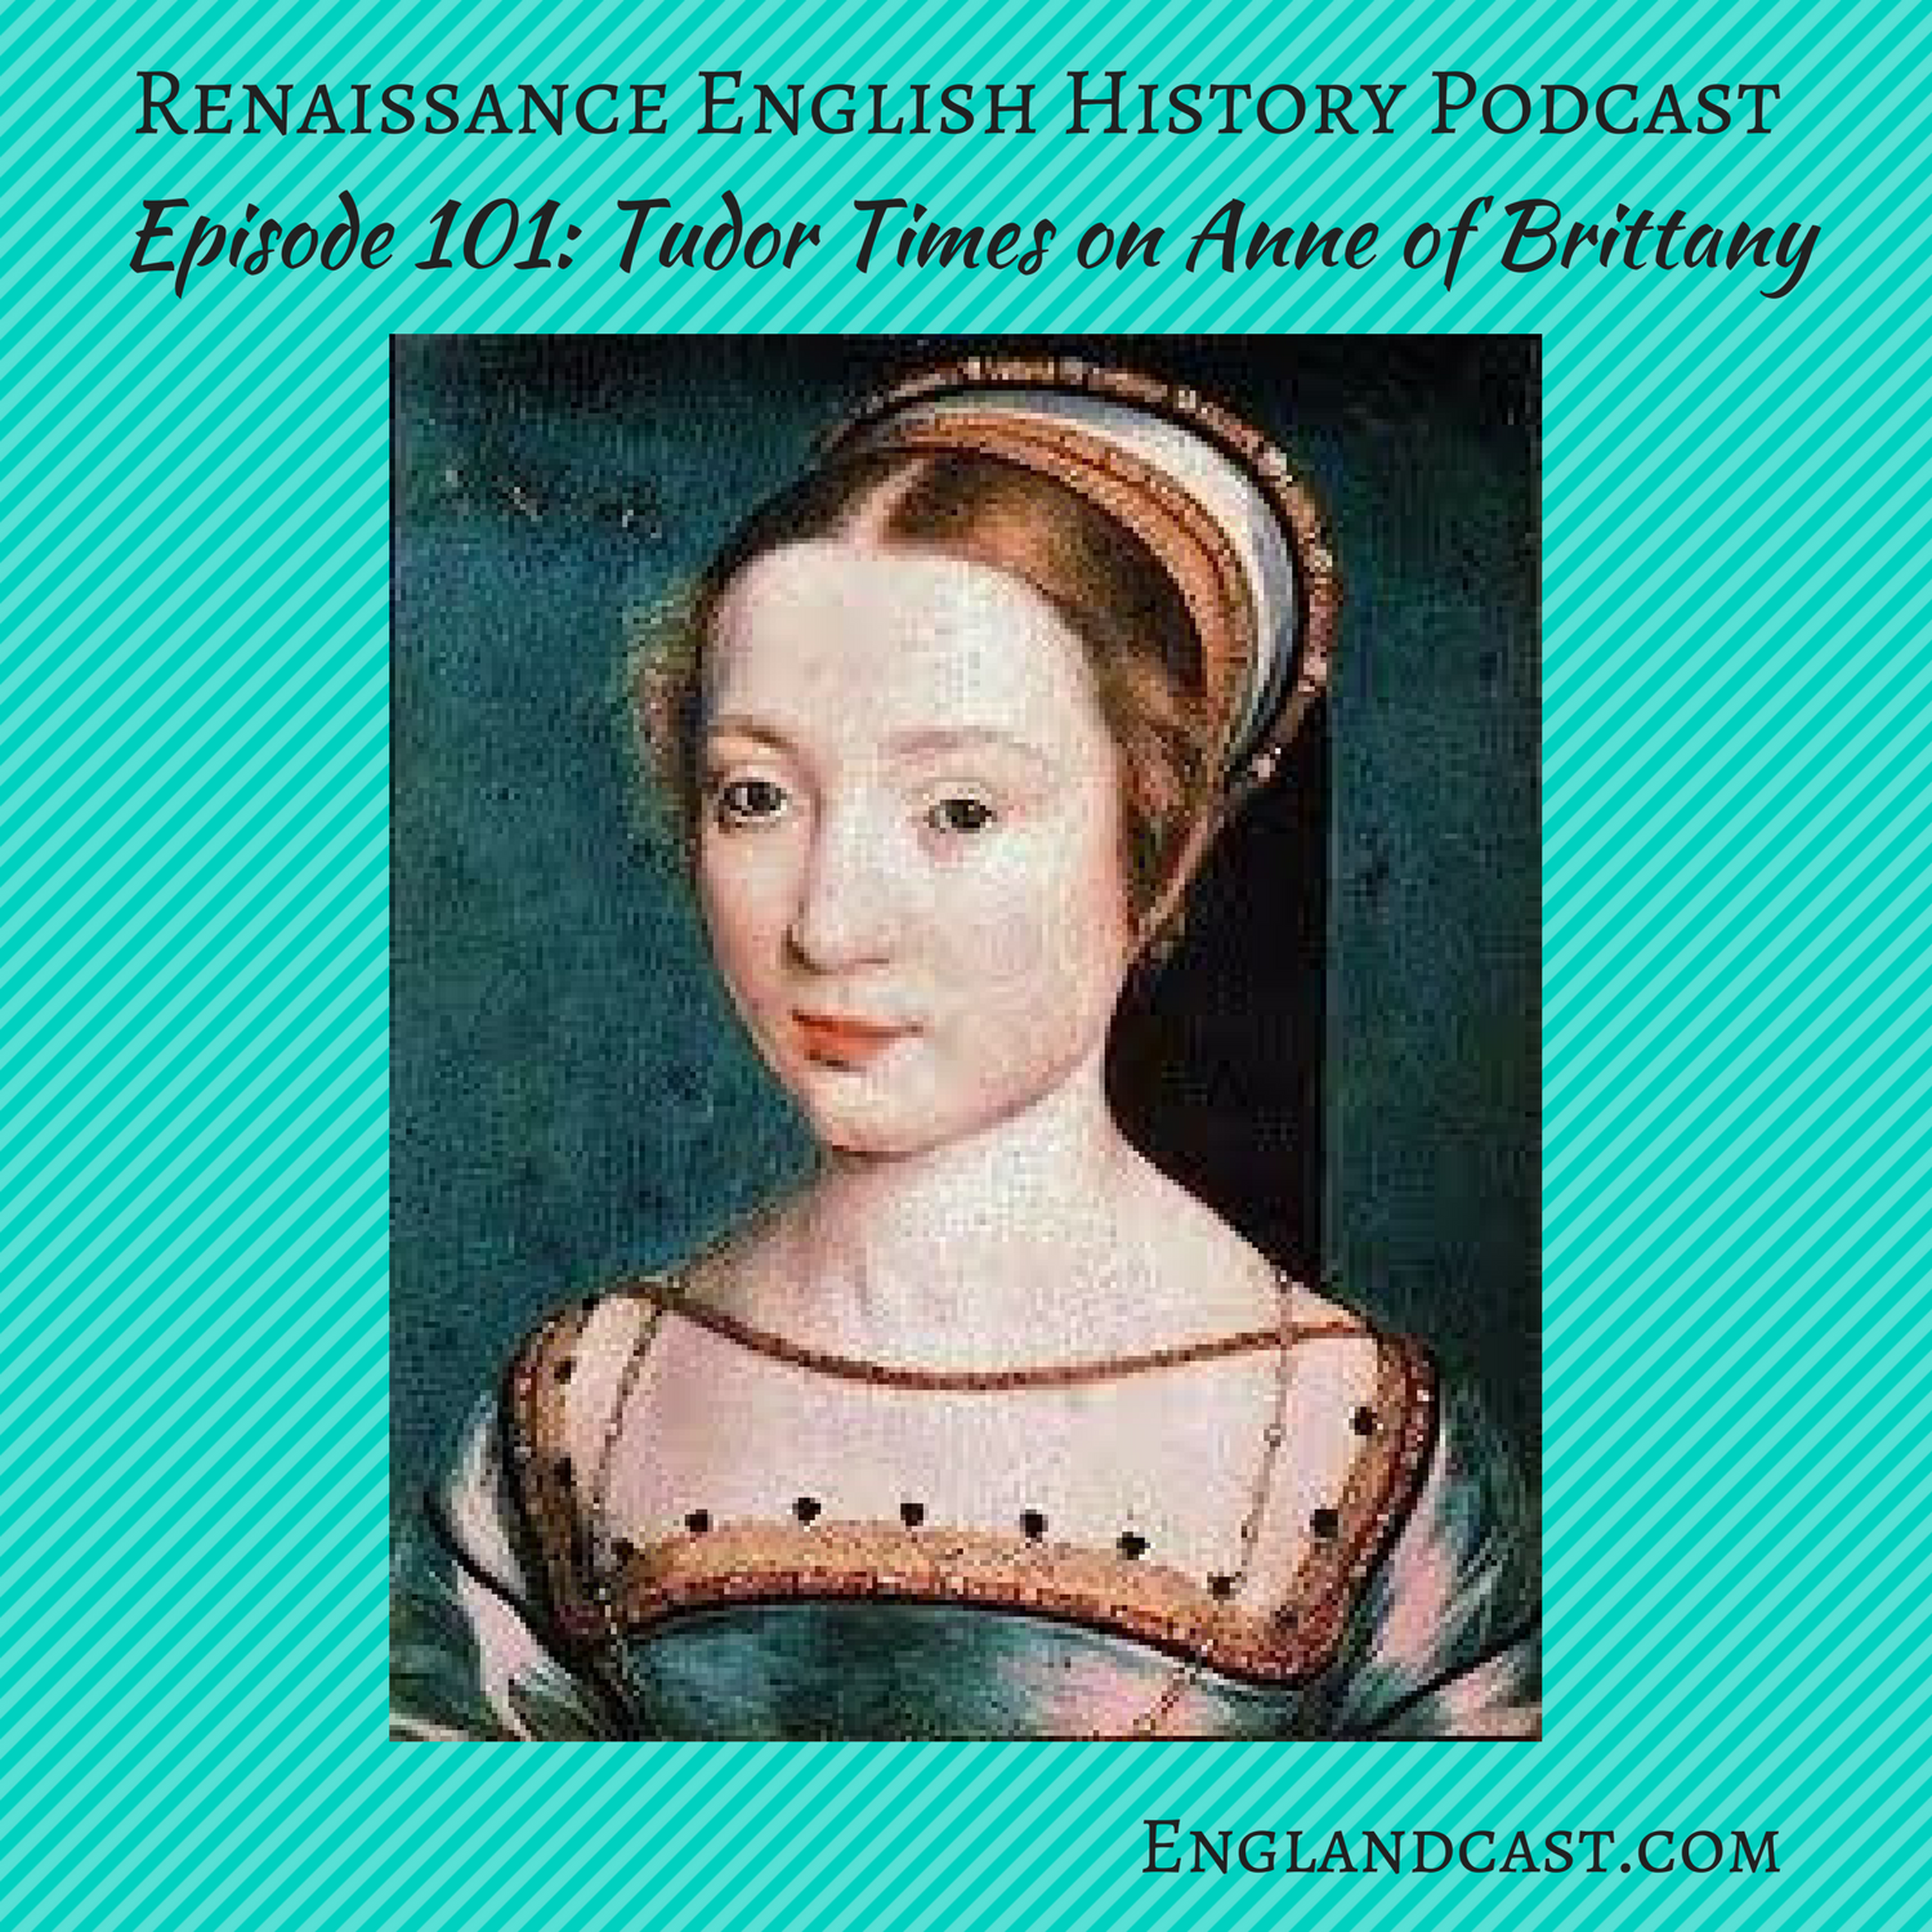 Episode 101: Tudor Times on Anne of Brittany